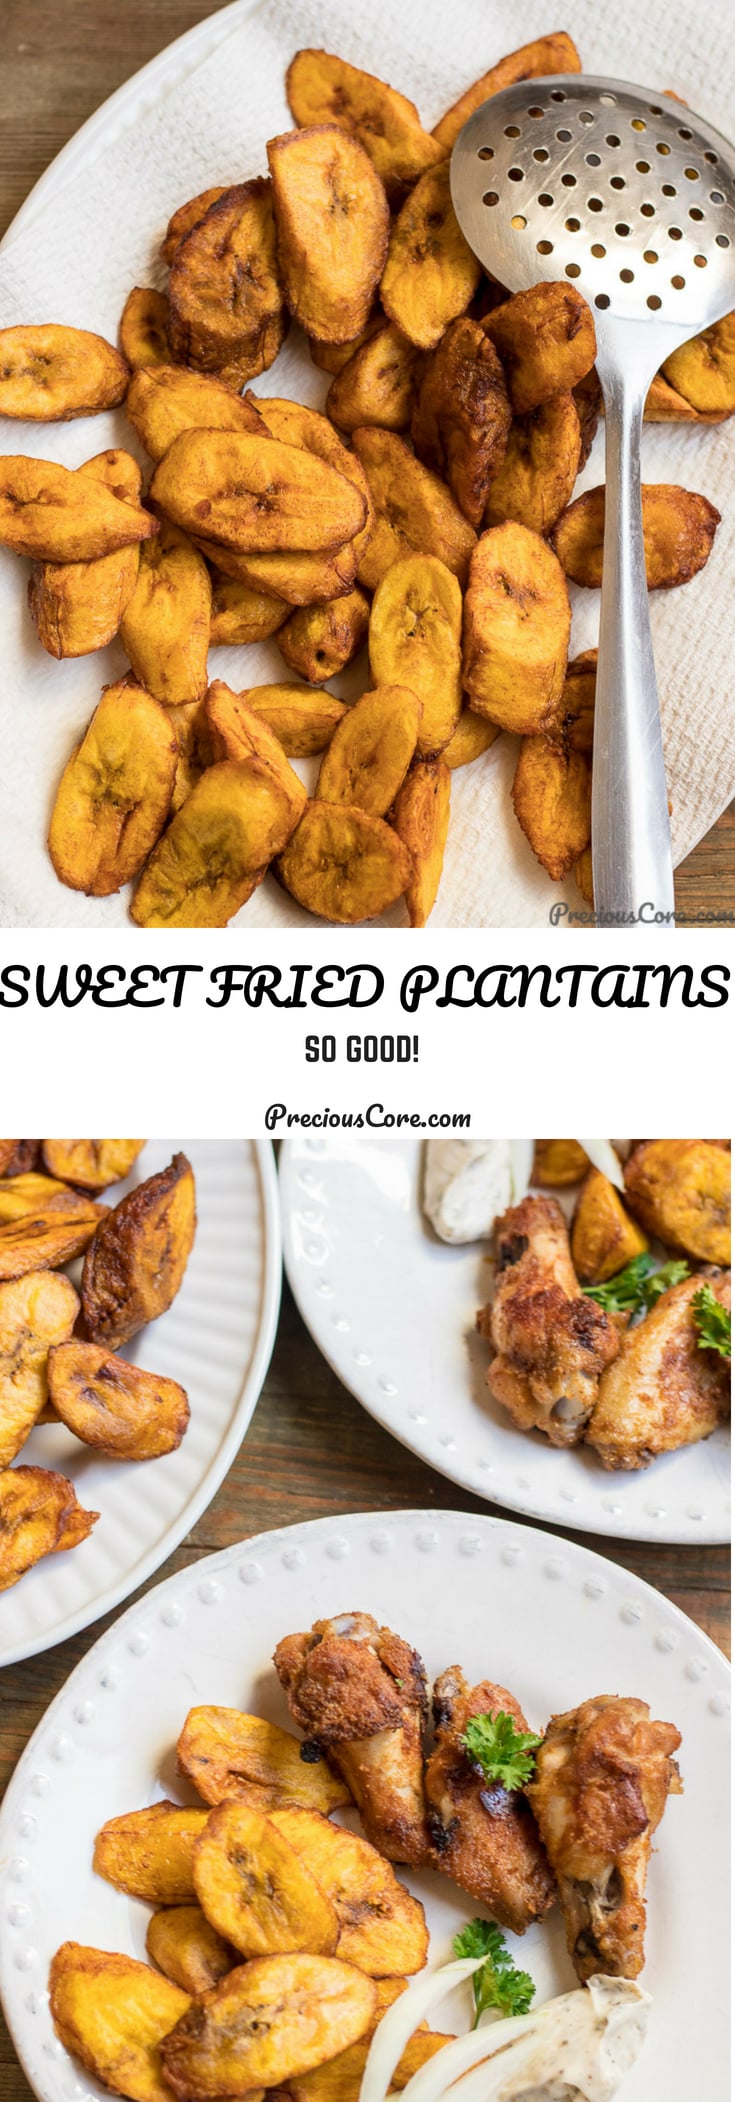 The perfect Sweet Fried Plantains! This is a side dish that can go with almost anything. Get the recipe on @PreciousCore #PreciousCore #Plantains #SideDish #AfricanFood #CarribeanFood